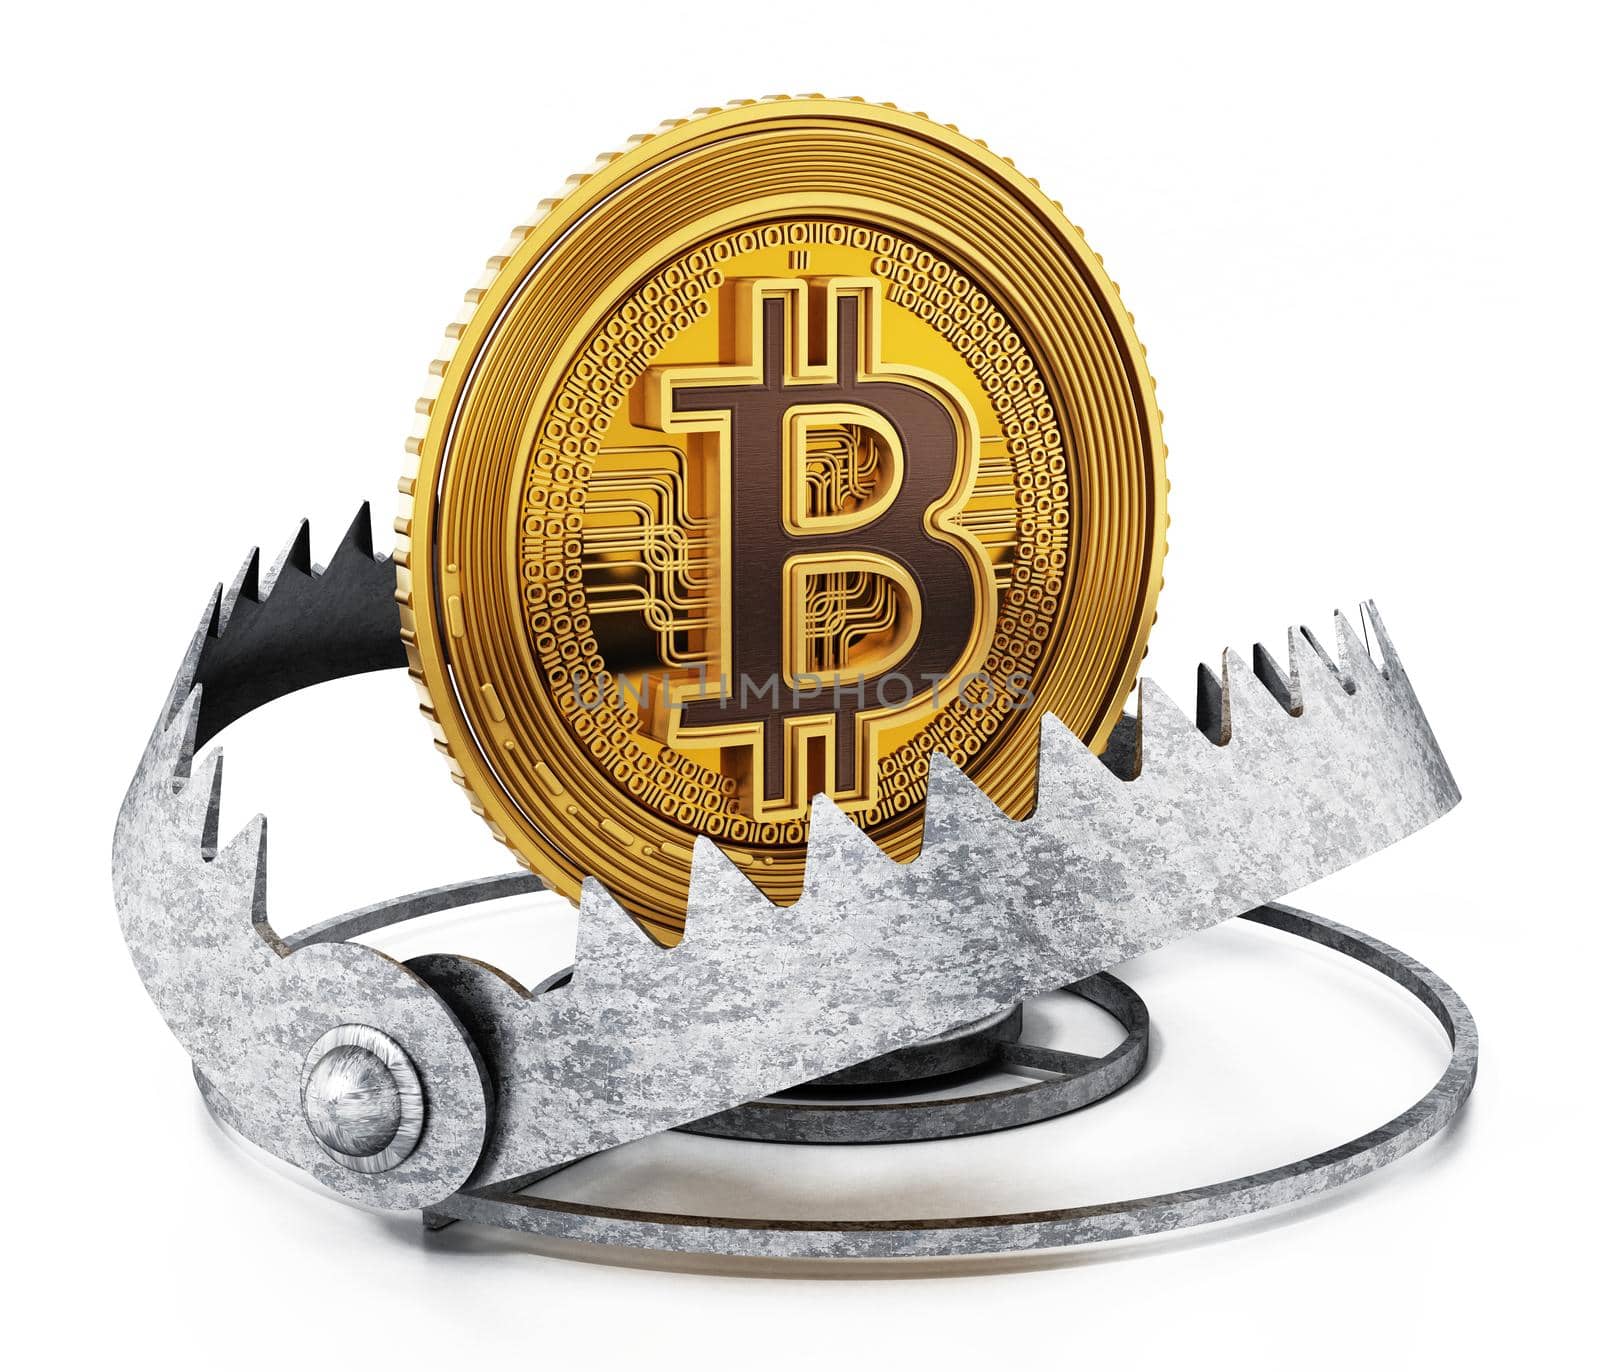 Gold digital coin in ready bear trap. 3D illustration by Simsek